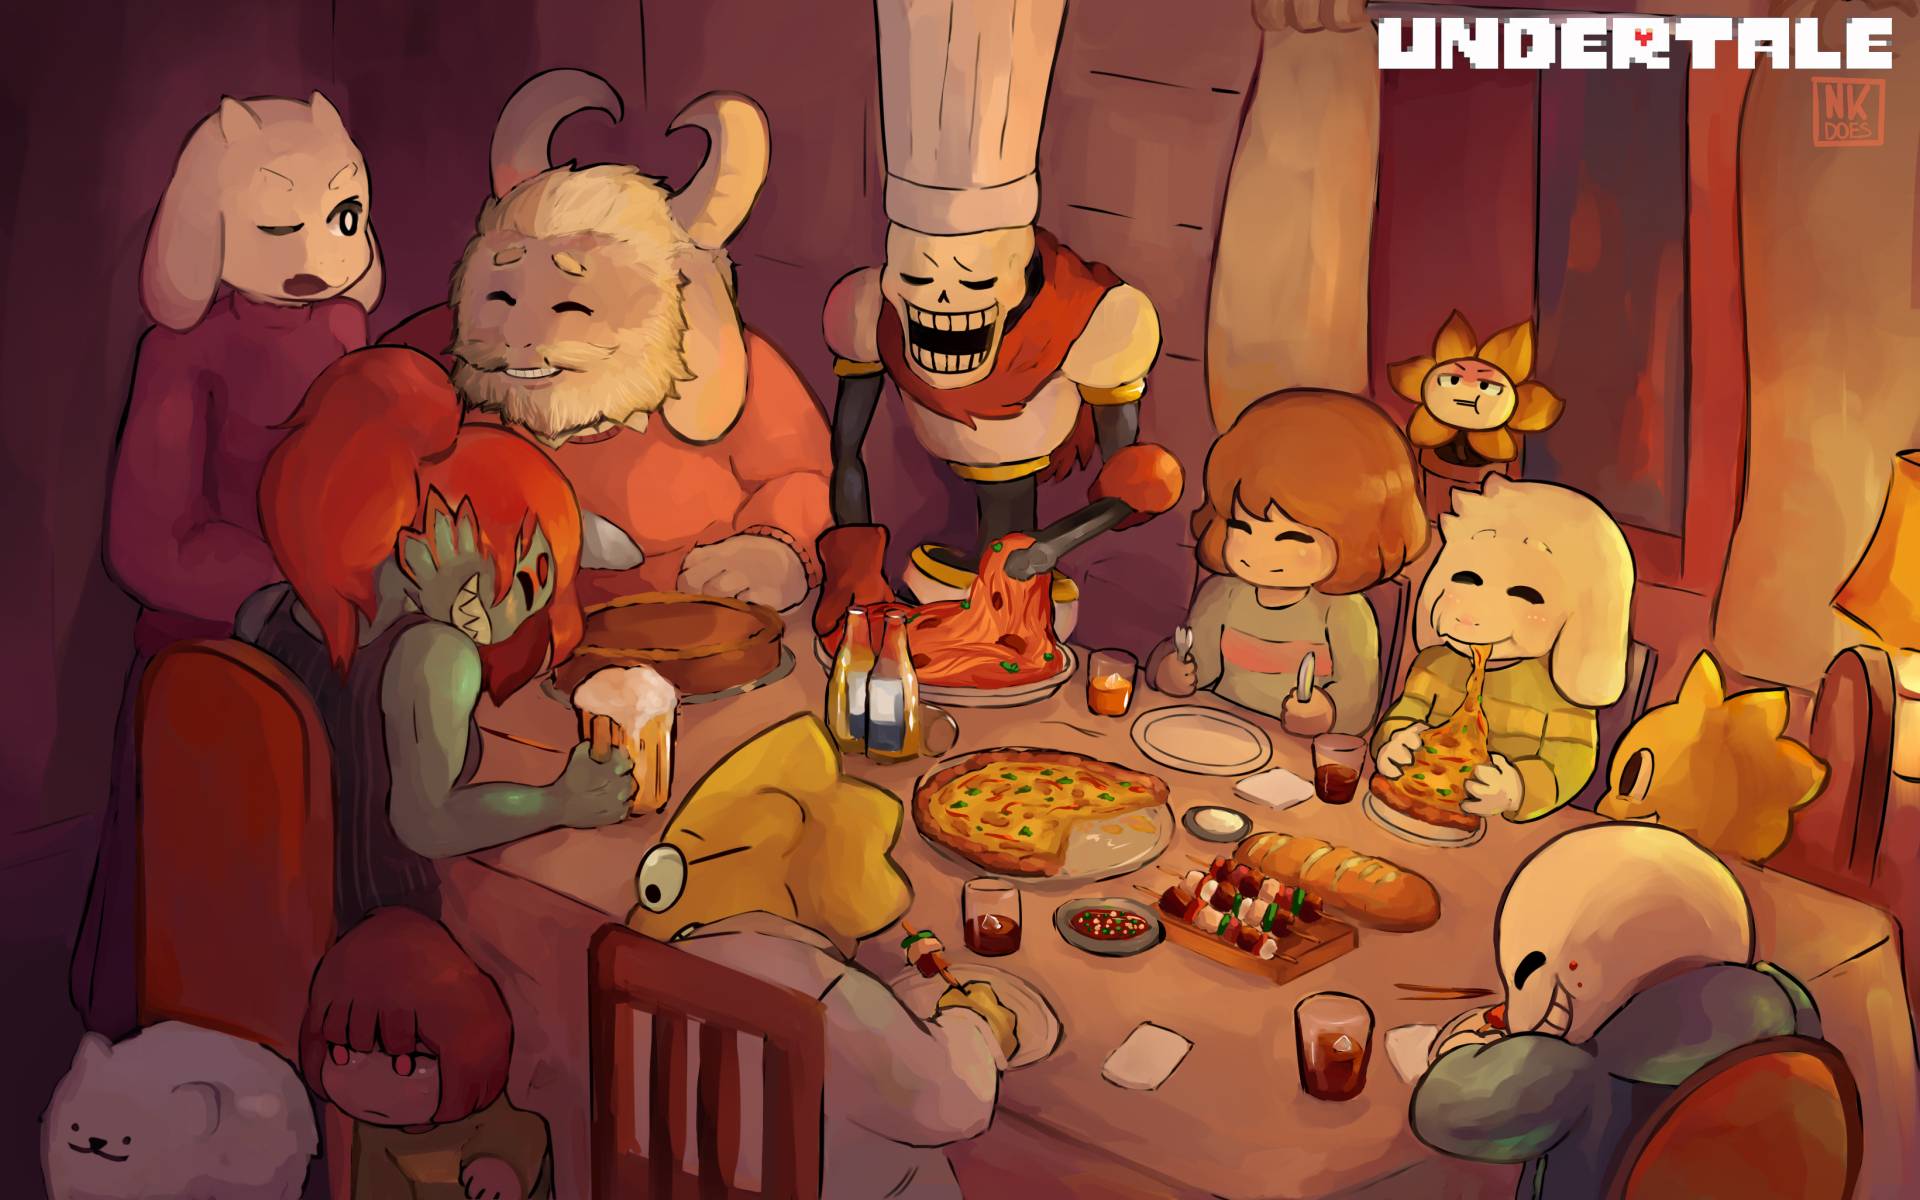 QWH688: Cute Undertale Wallpaper, Awesome Undertale Background